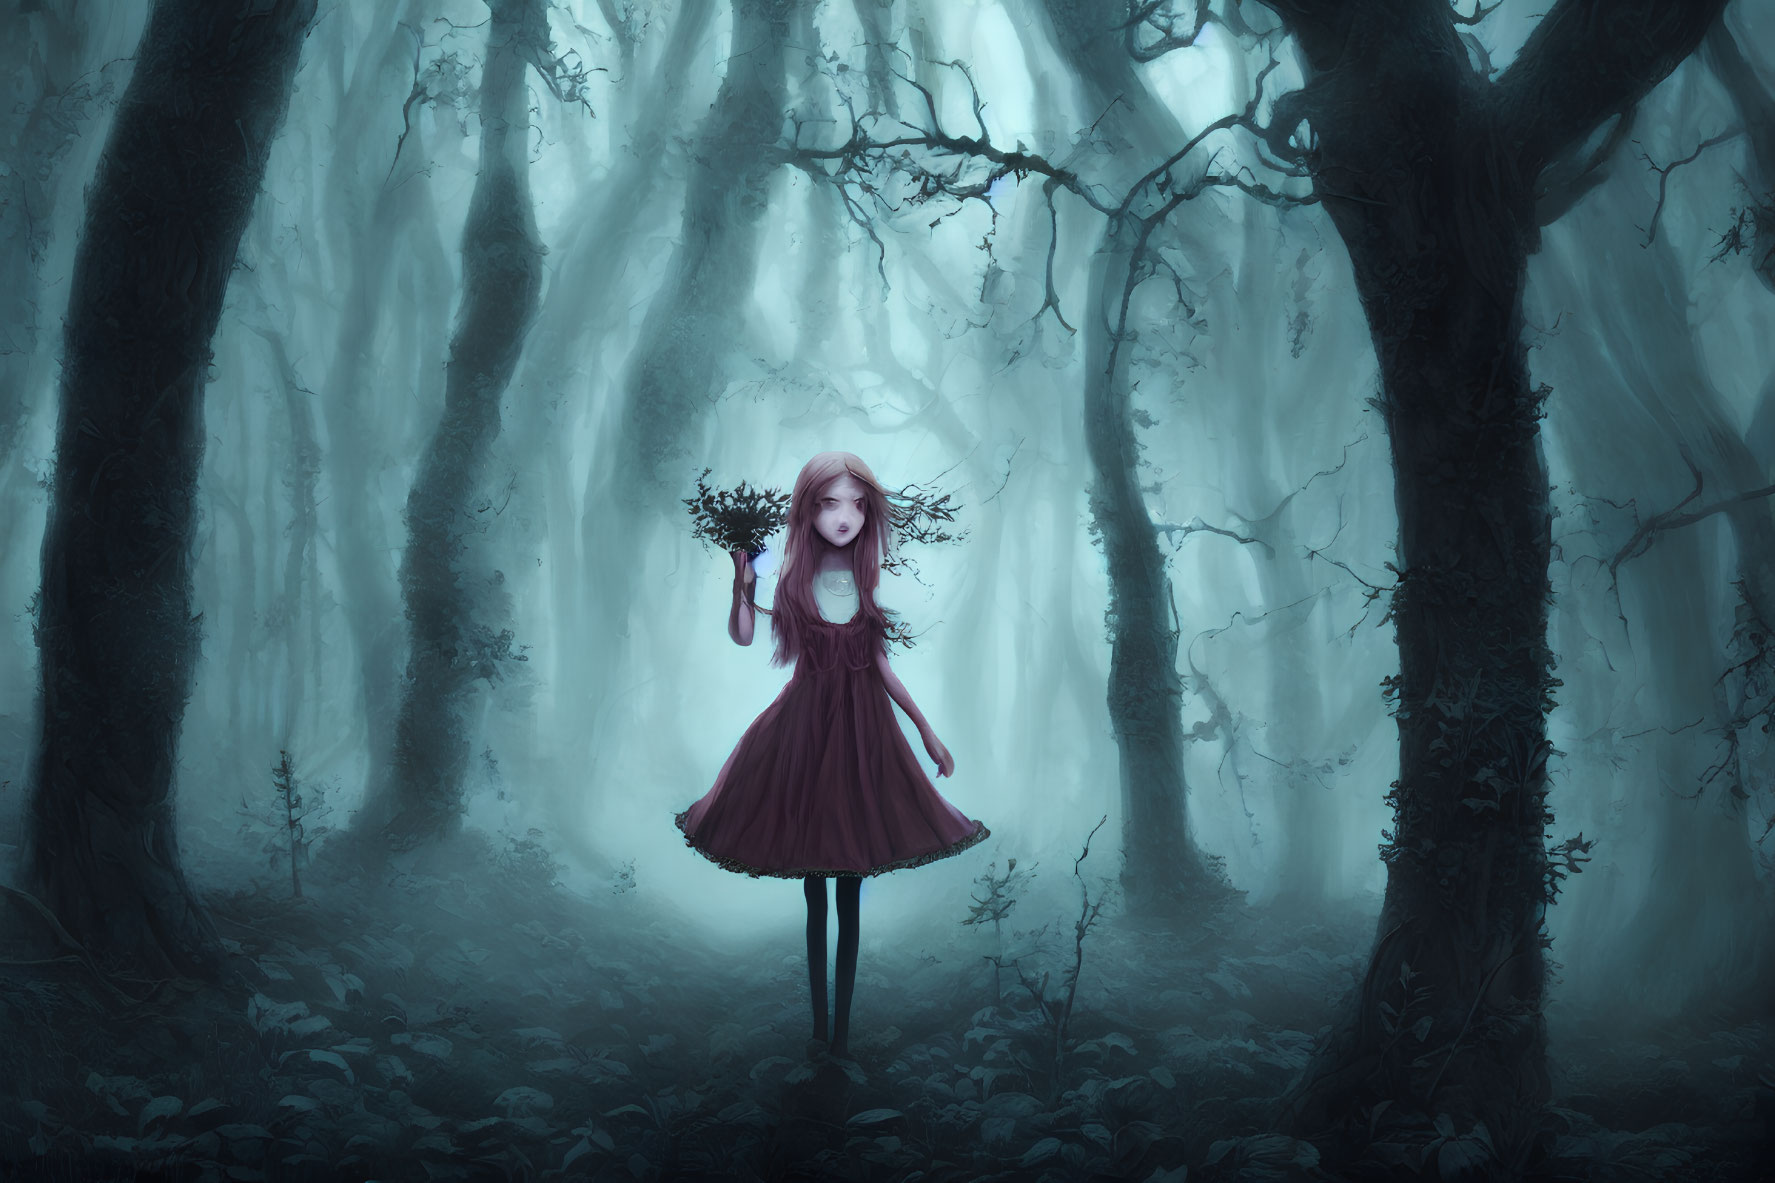 Girl in Red Dress Holding Wreath in Ethereal Blue Forest